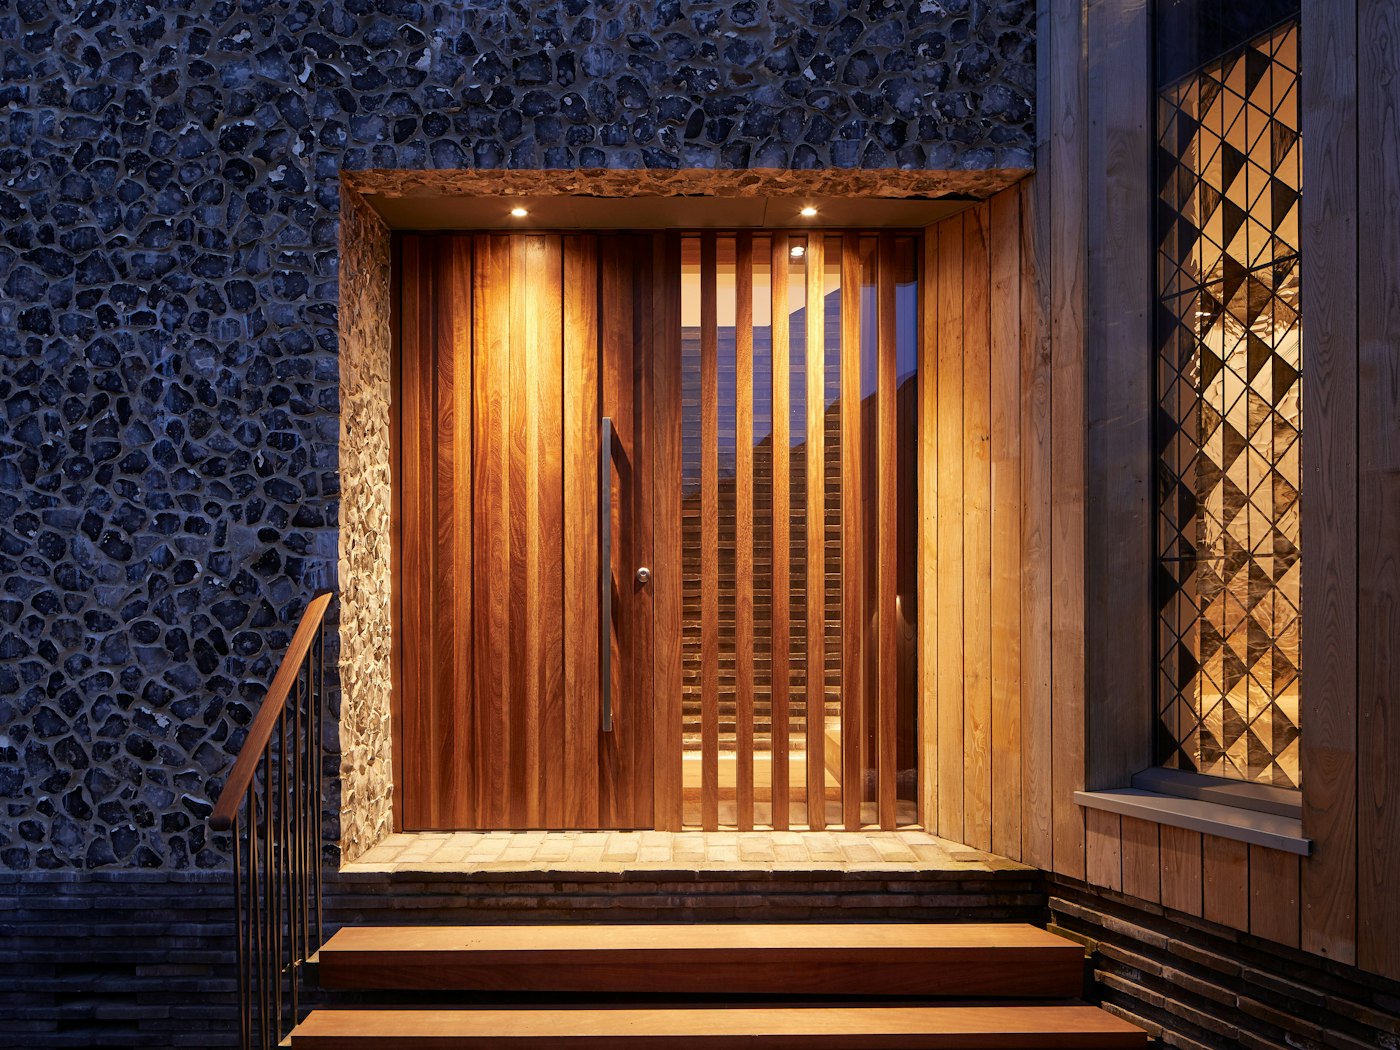 The Iroko has darkened beautifully and works very well with the other building materials